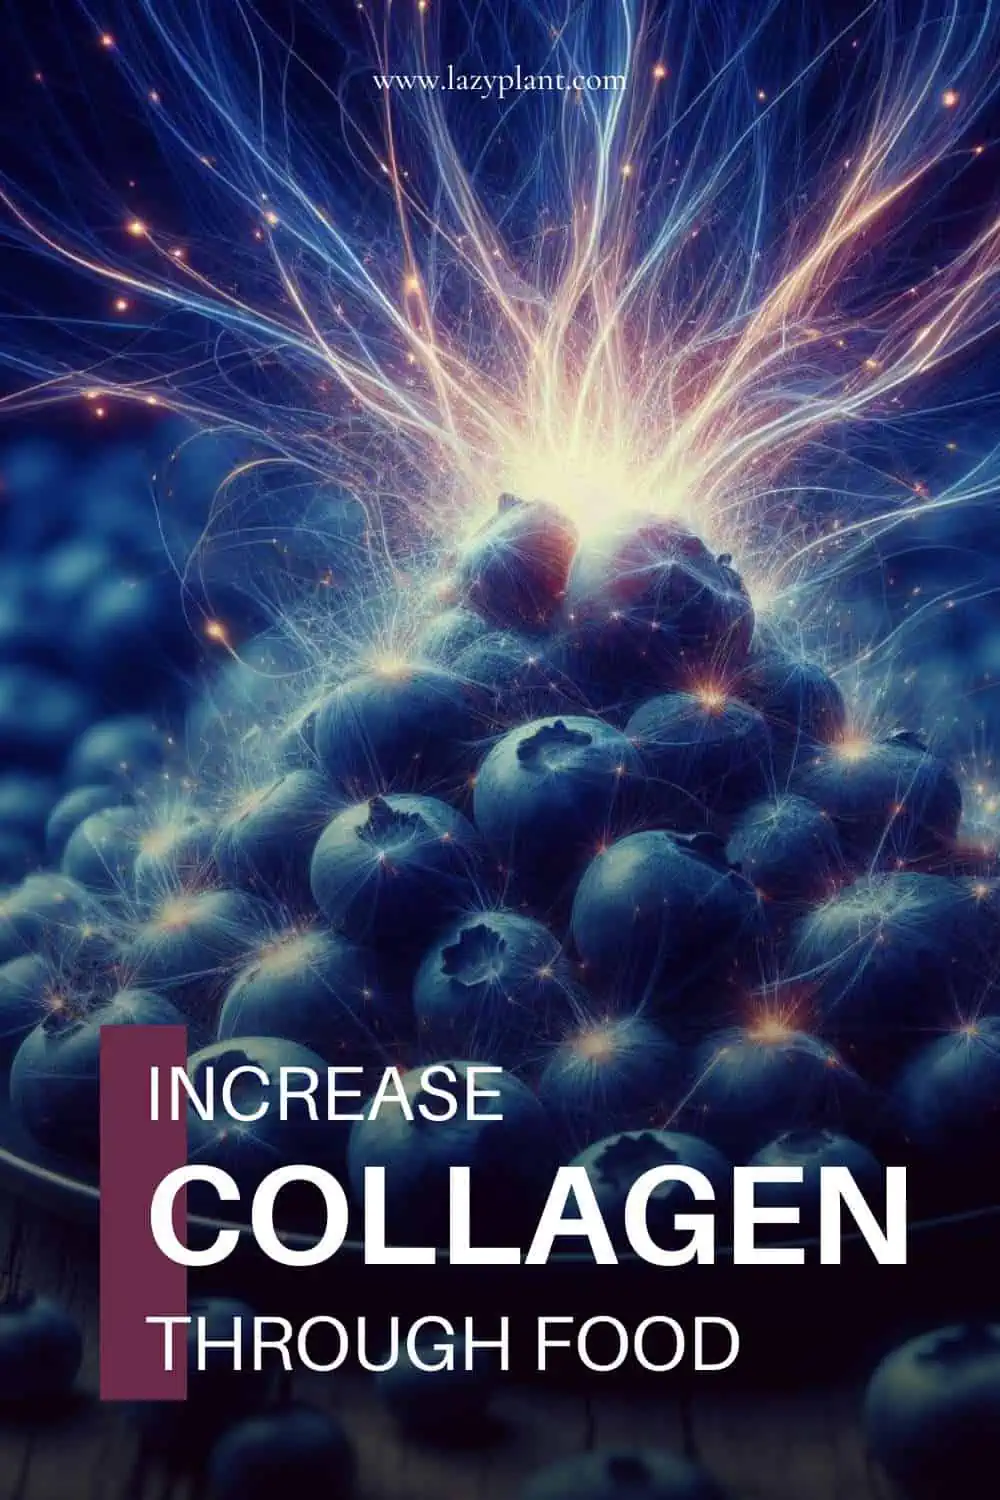 Snack ideas to enhance Collagen synthesis.